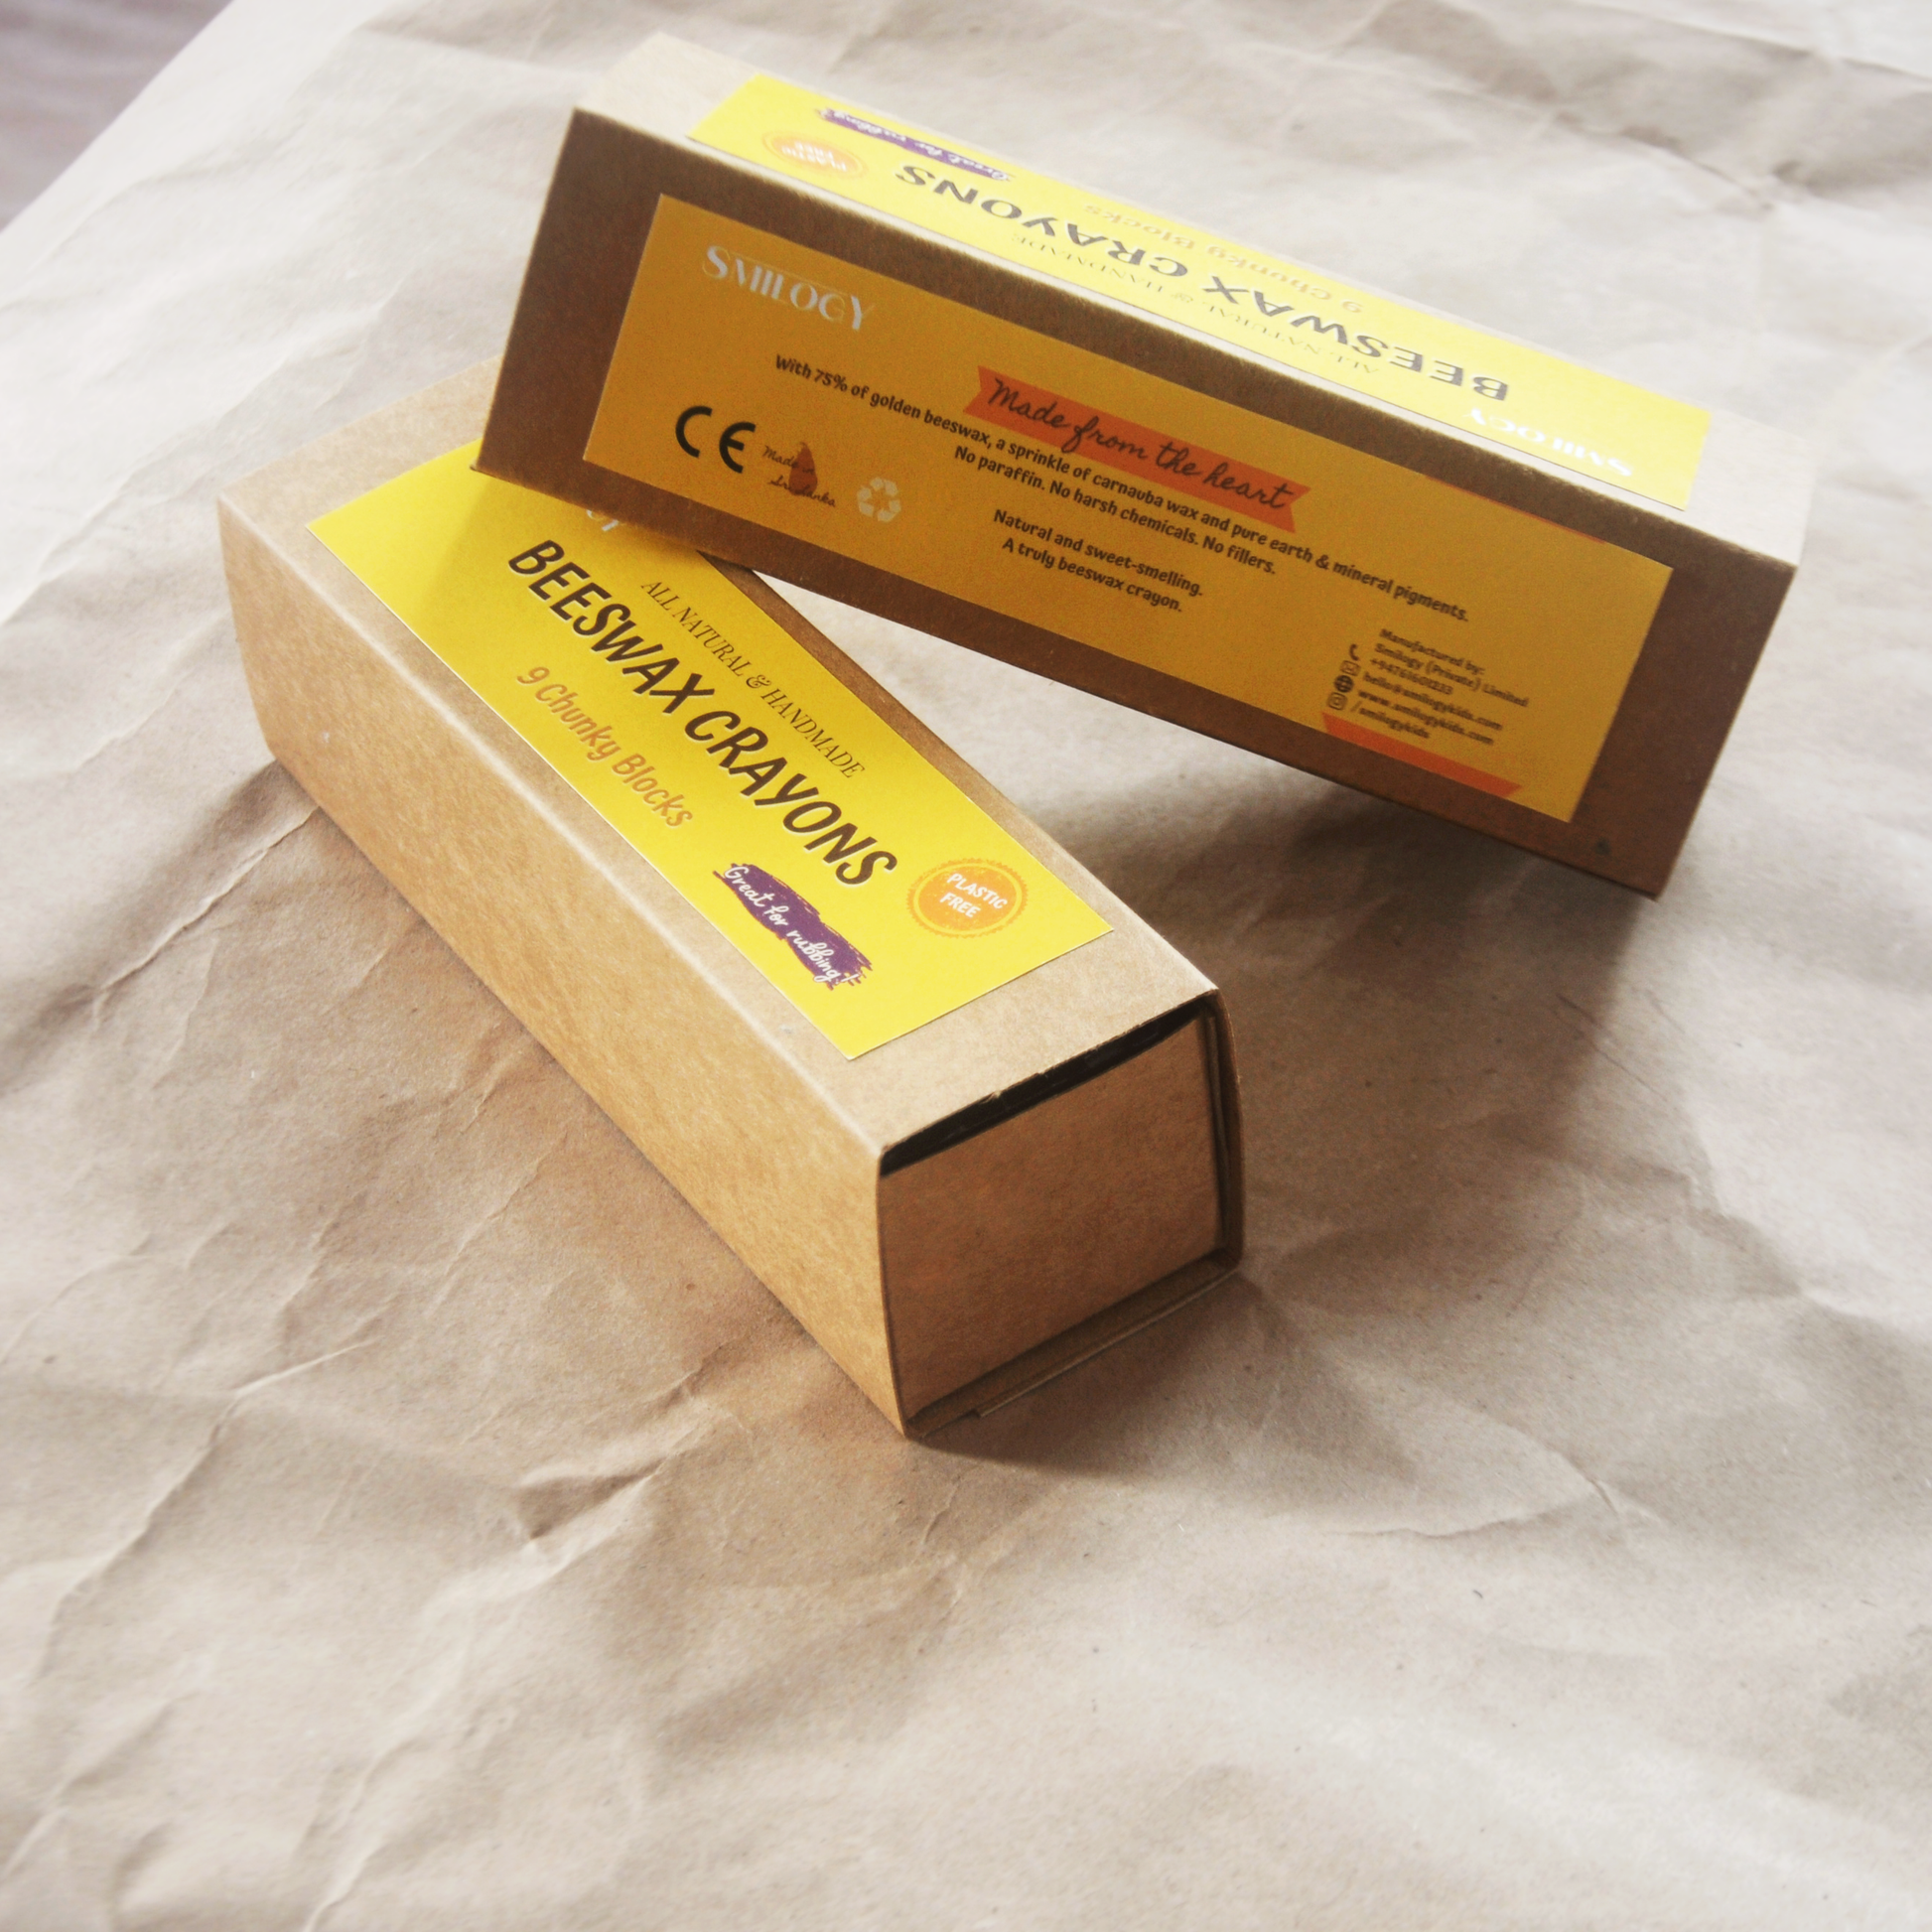 2 boxes of nontoxic organic beeswax block crayons for rubbing